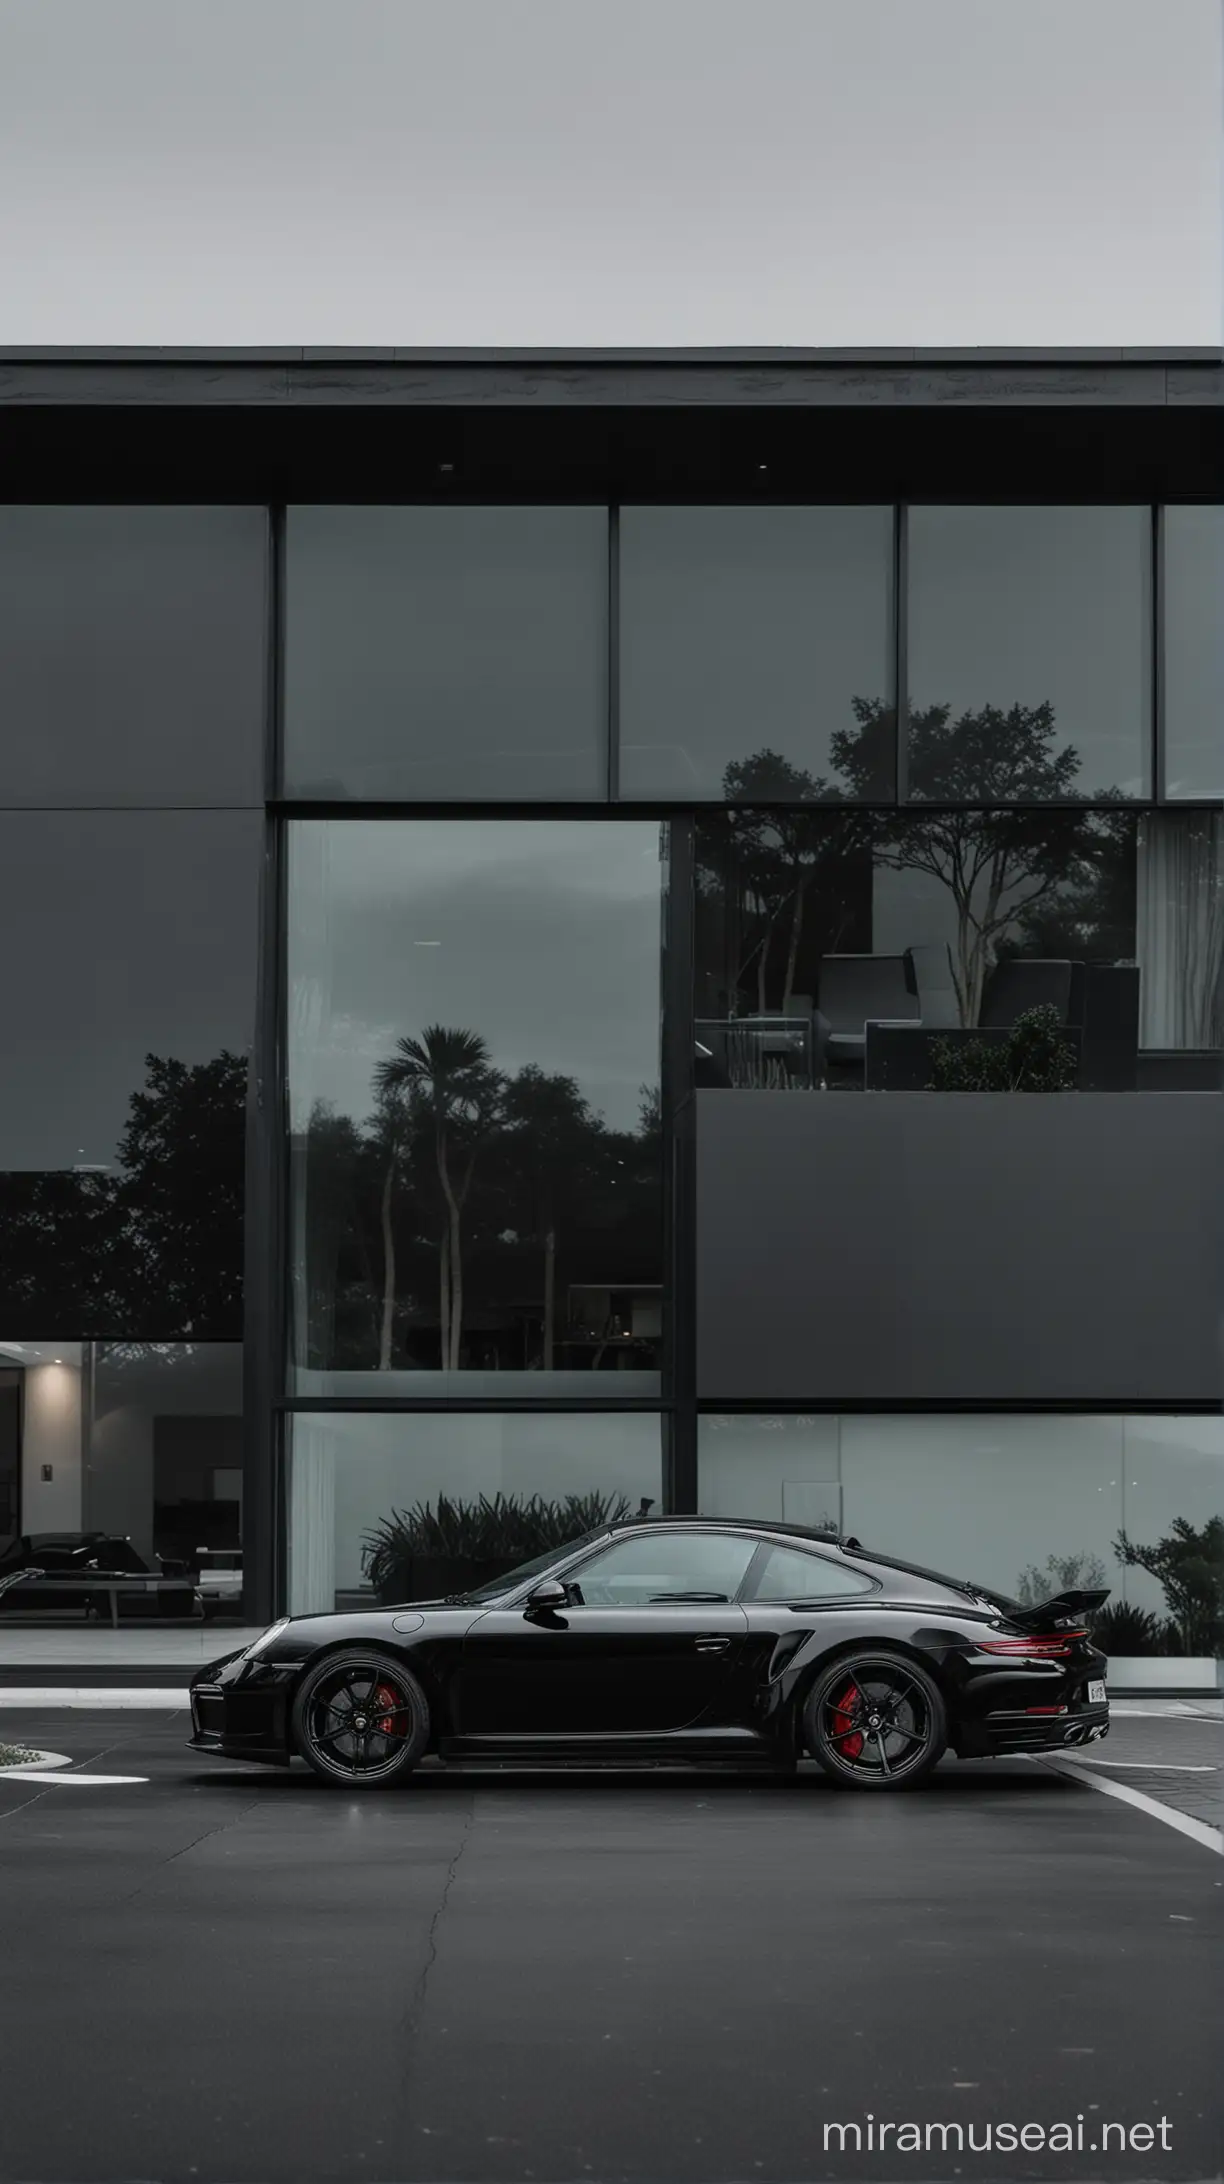 Give me a black Porsche in a  
minimalist black house with glass Windows, while.the camera is a bit far back